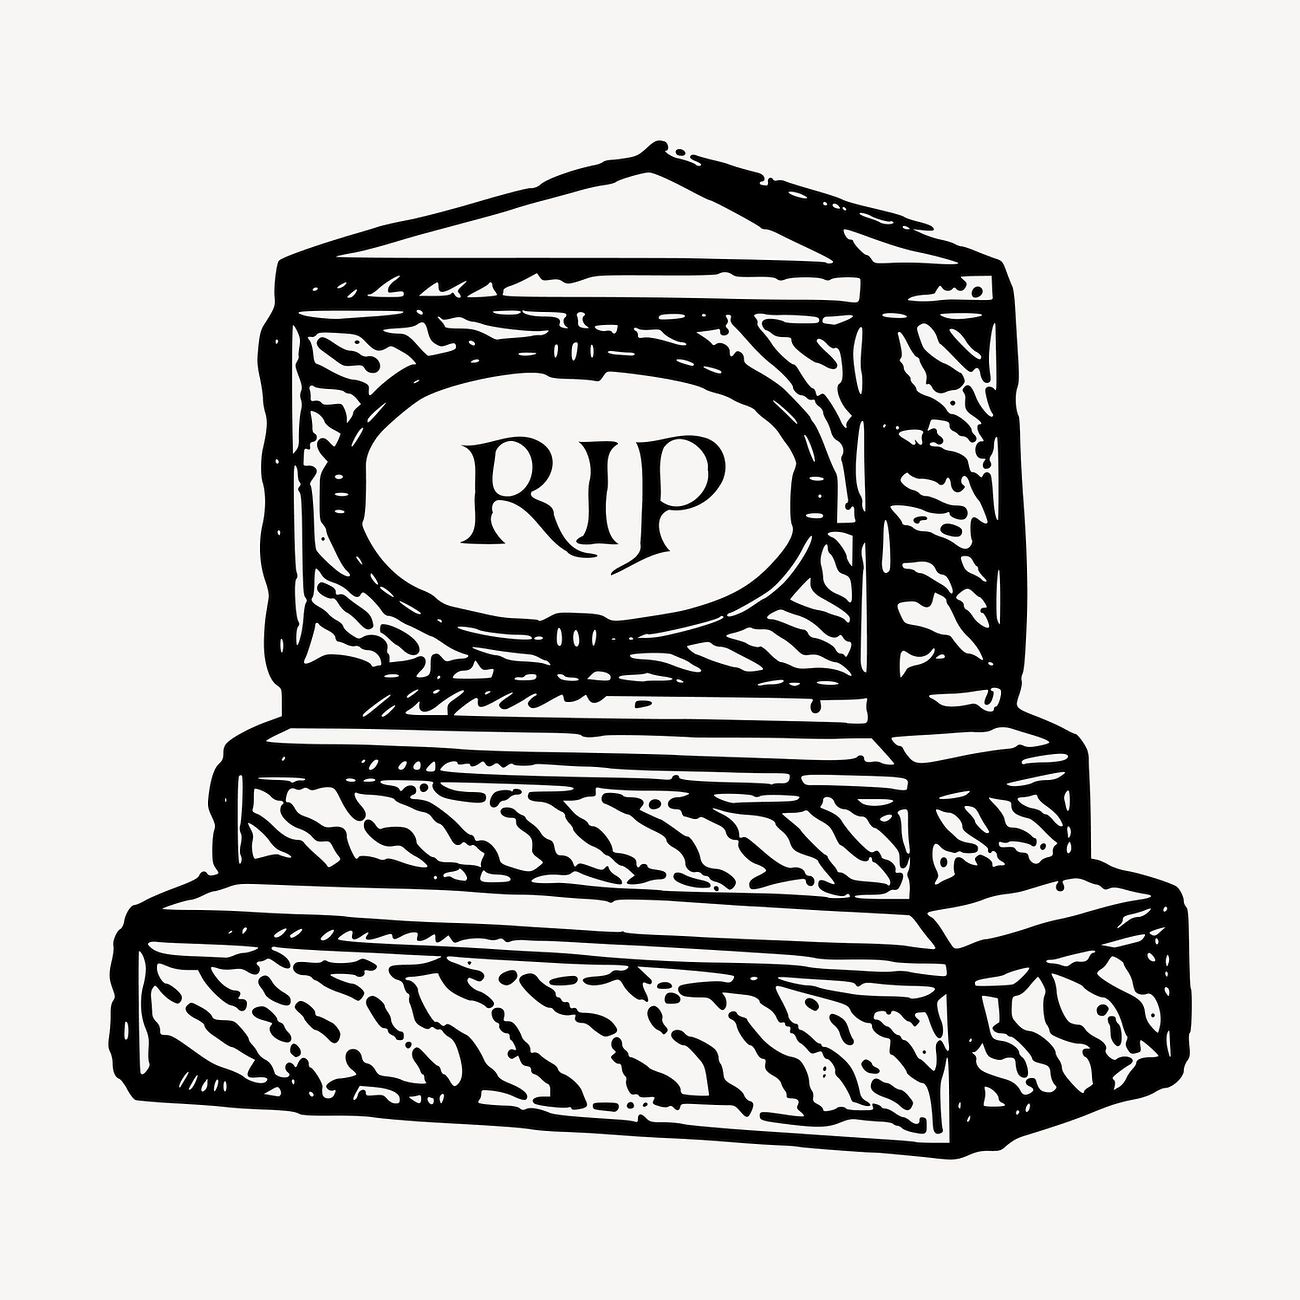 RIP tombstone clipart, vintage hand